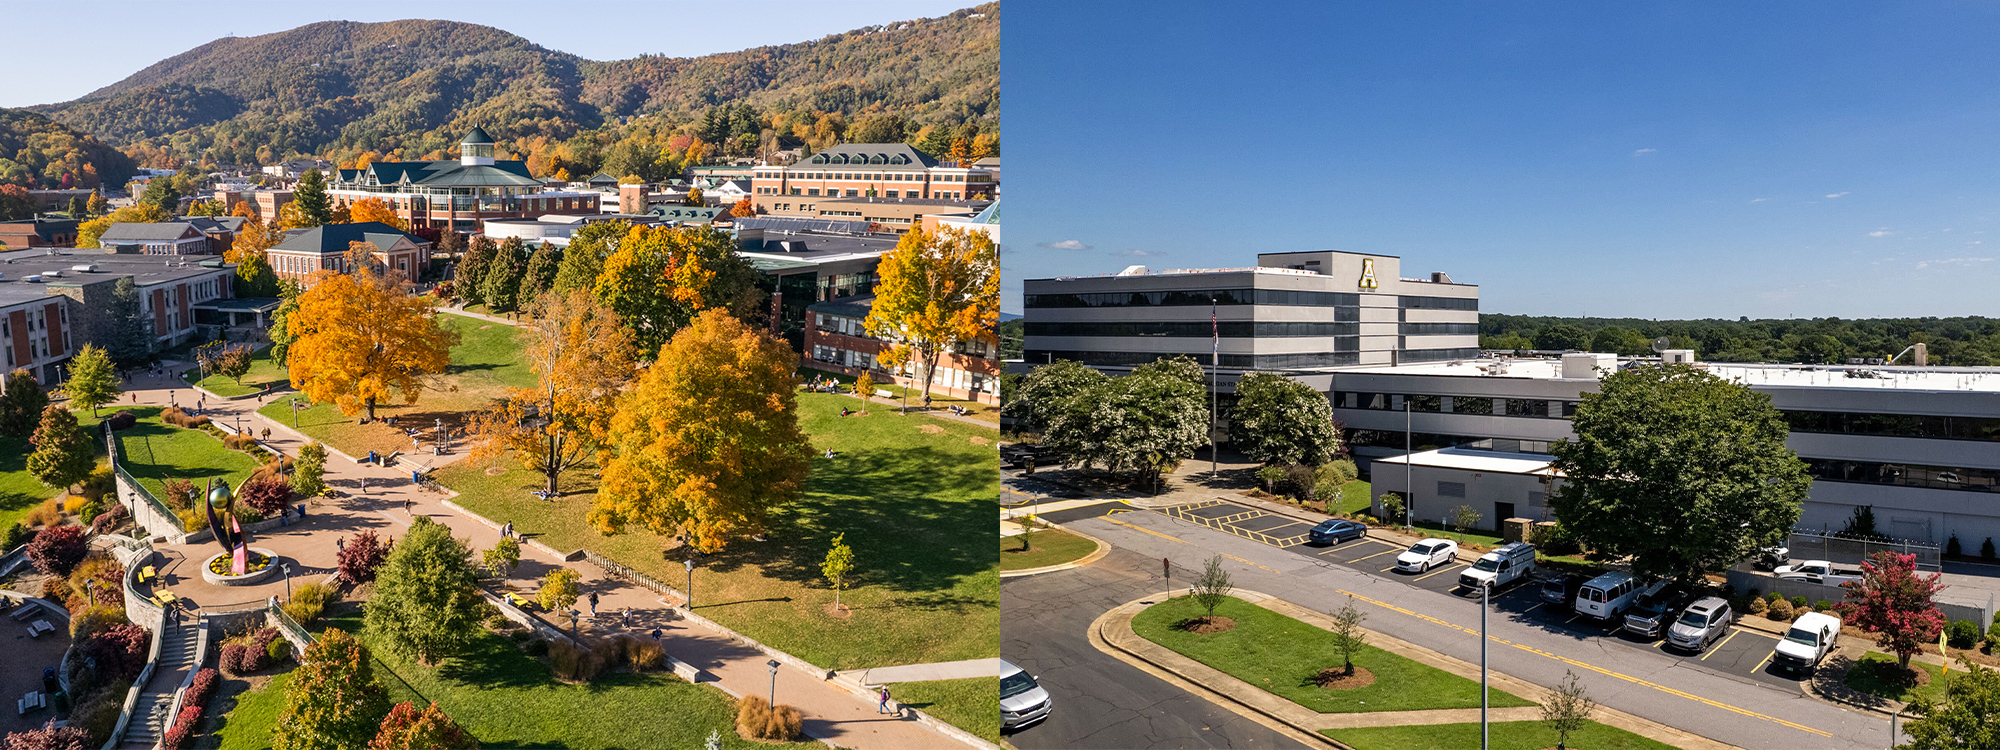 21,253 Mountaineers enroll at App State for fall 2023 — largest class in school history